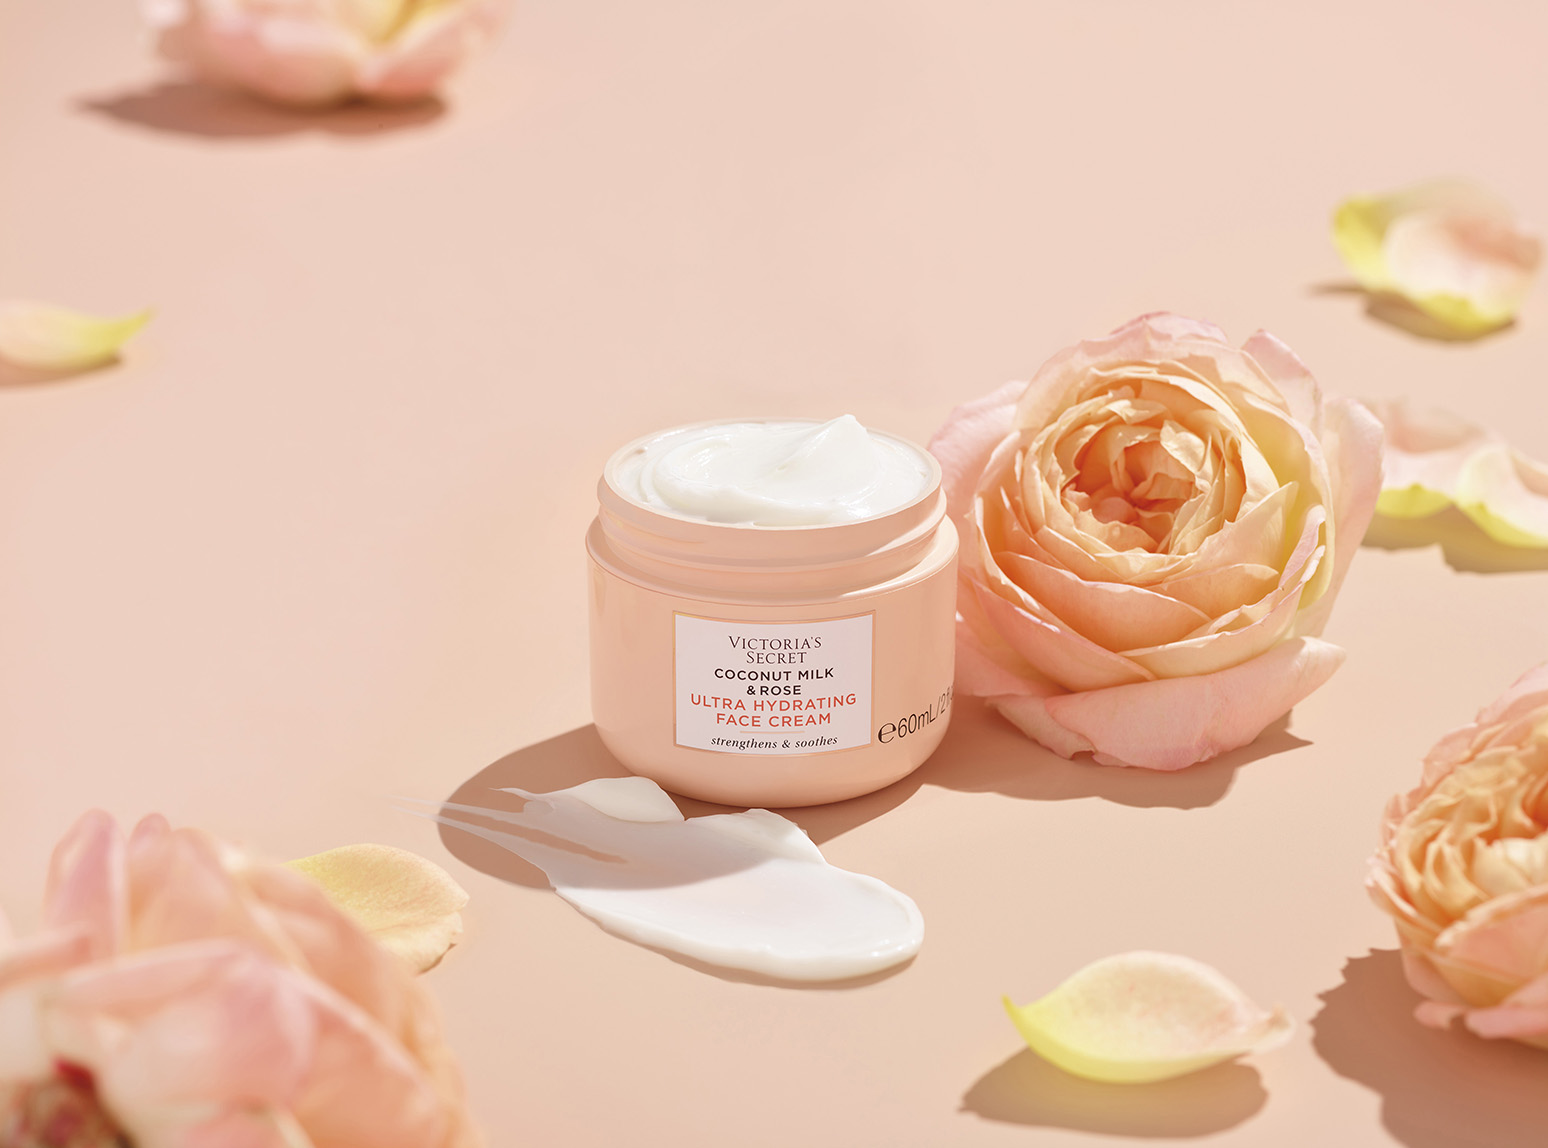 Victoria's Secret Natural Beauty Coconut Milk & Rose Skin Care Collection - Ultra Hydrating Face Cream